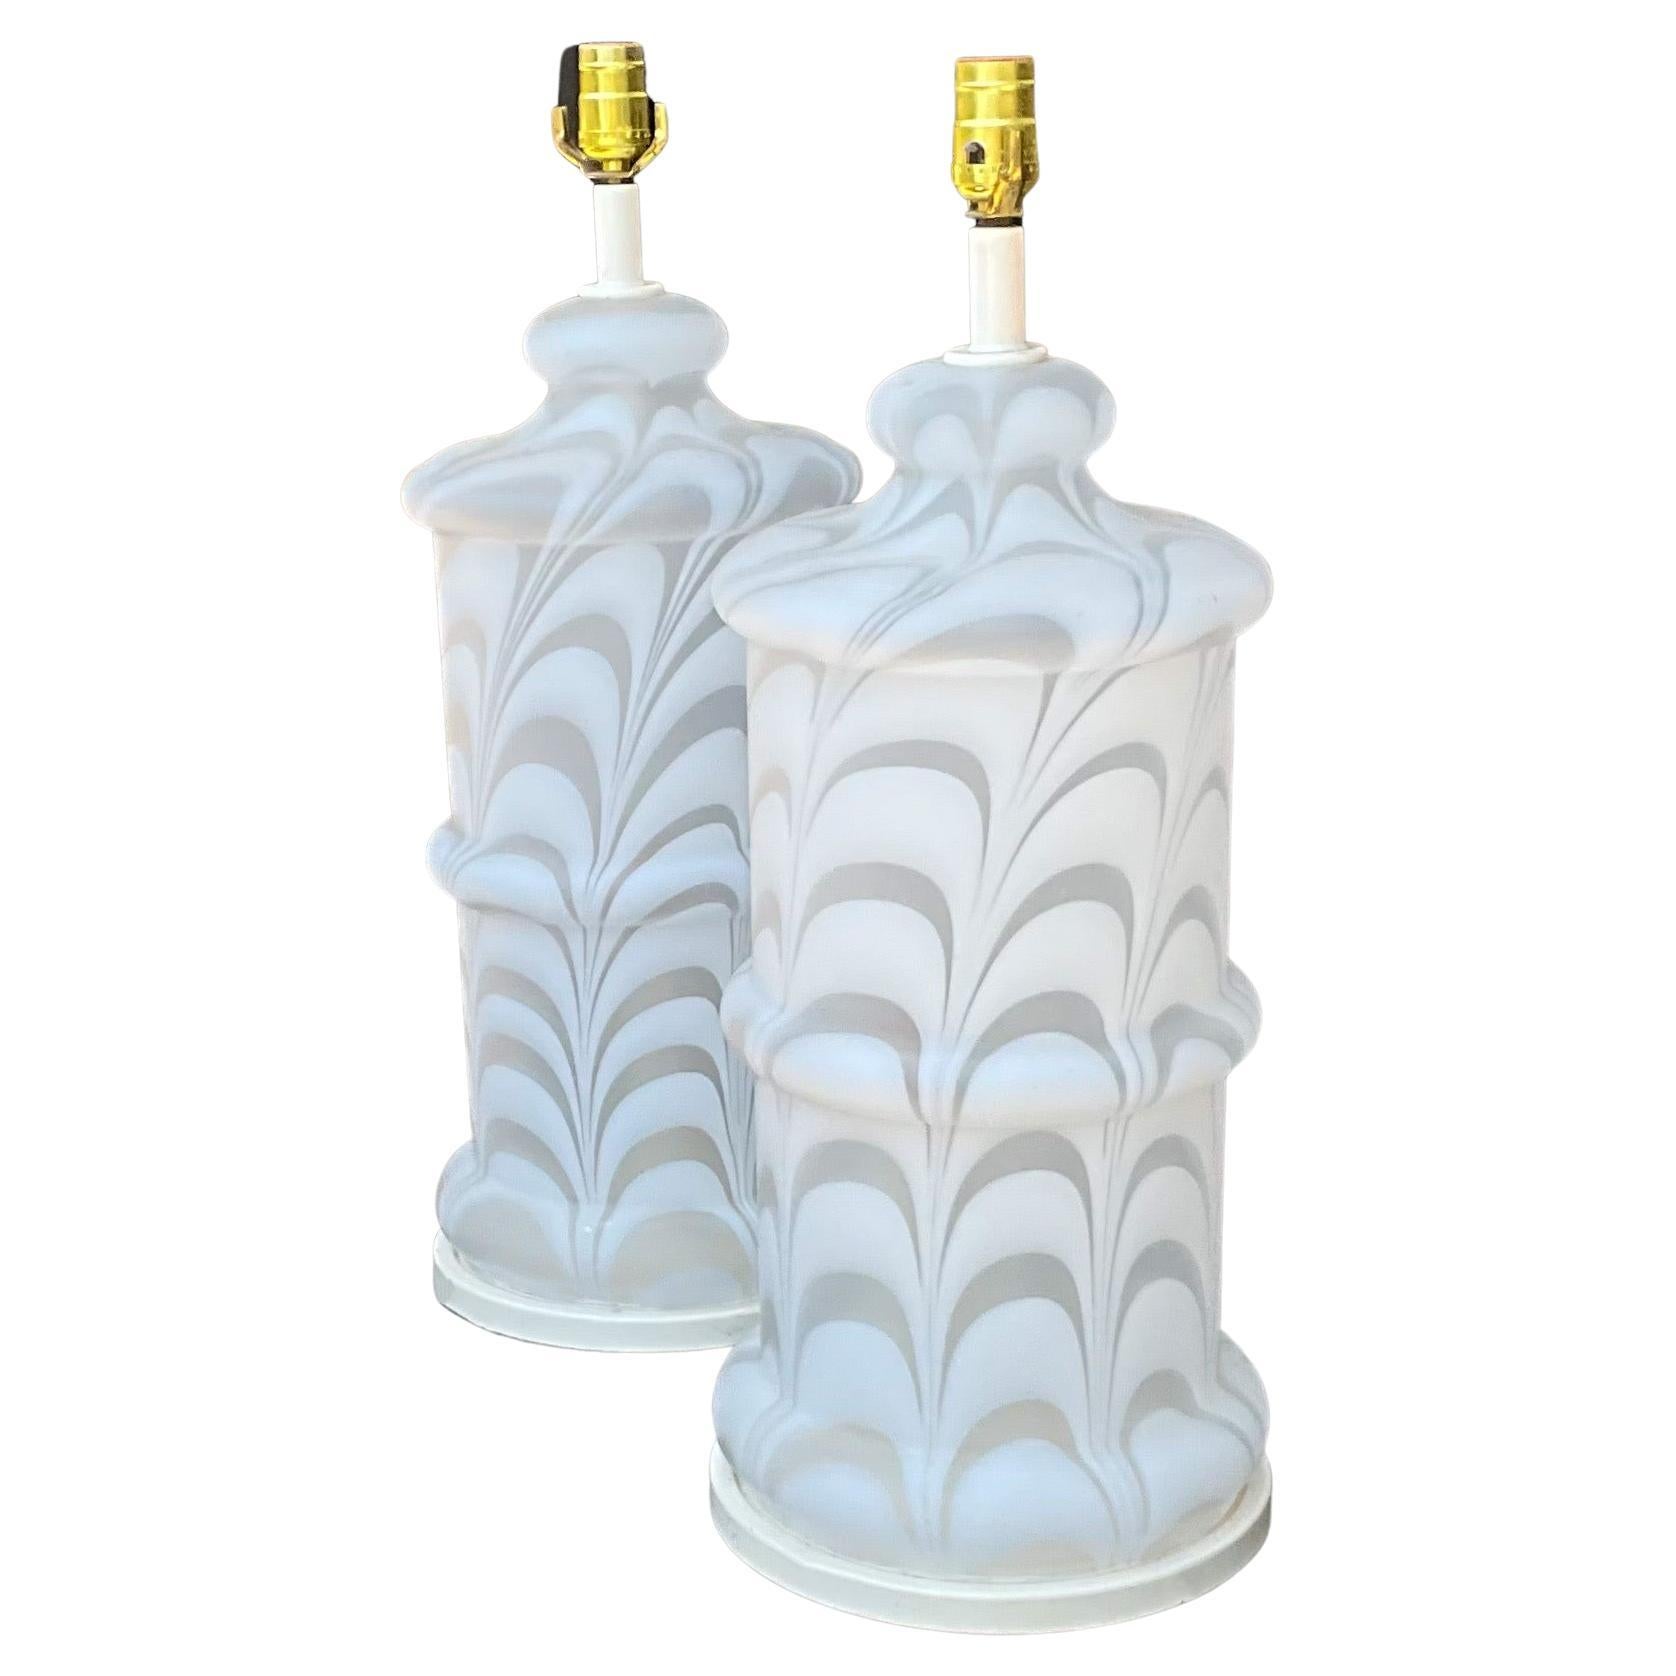 1970s Modern Monumental Mazzega Style Swirled Murano Glass Table Lamps - Pair